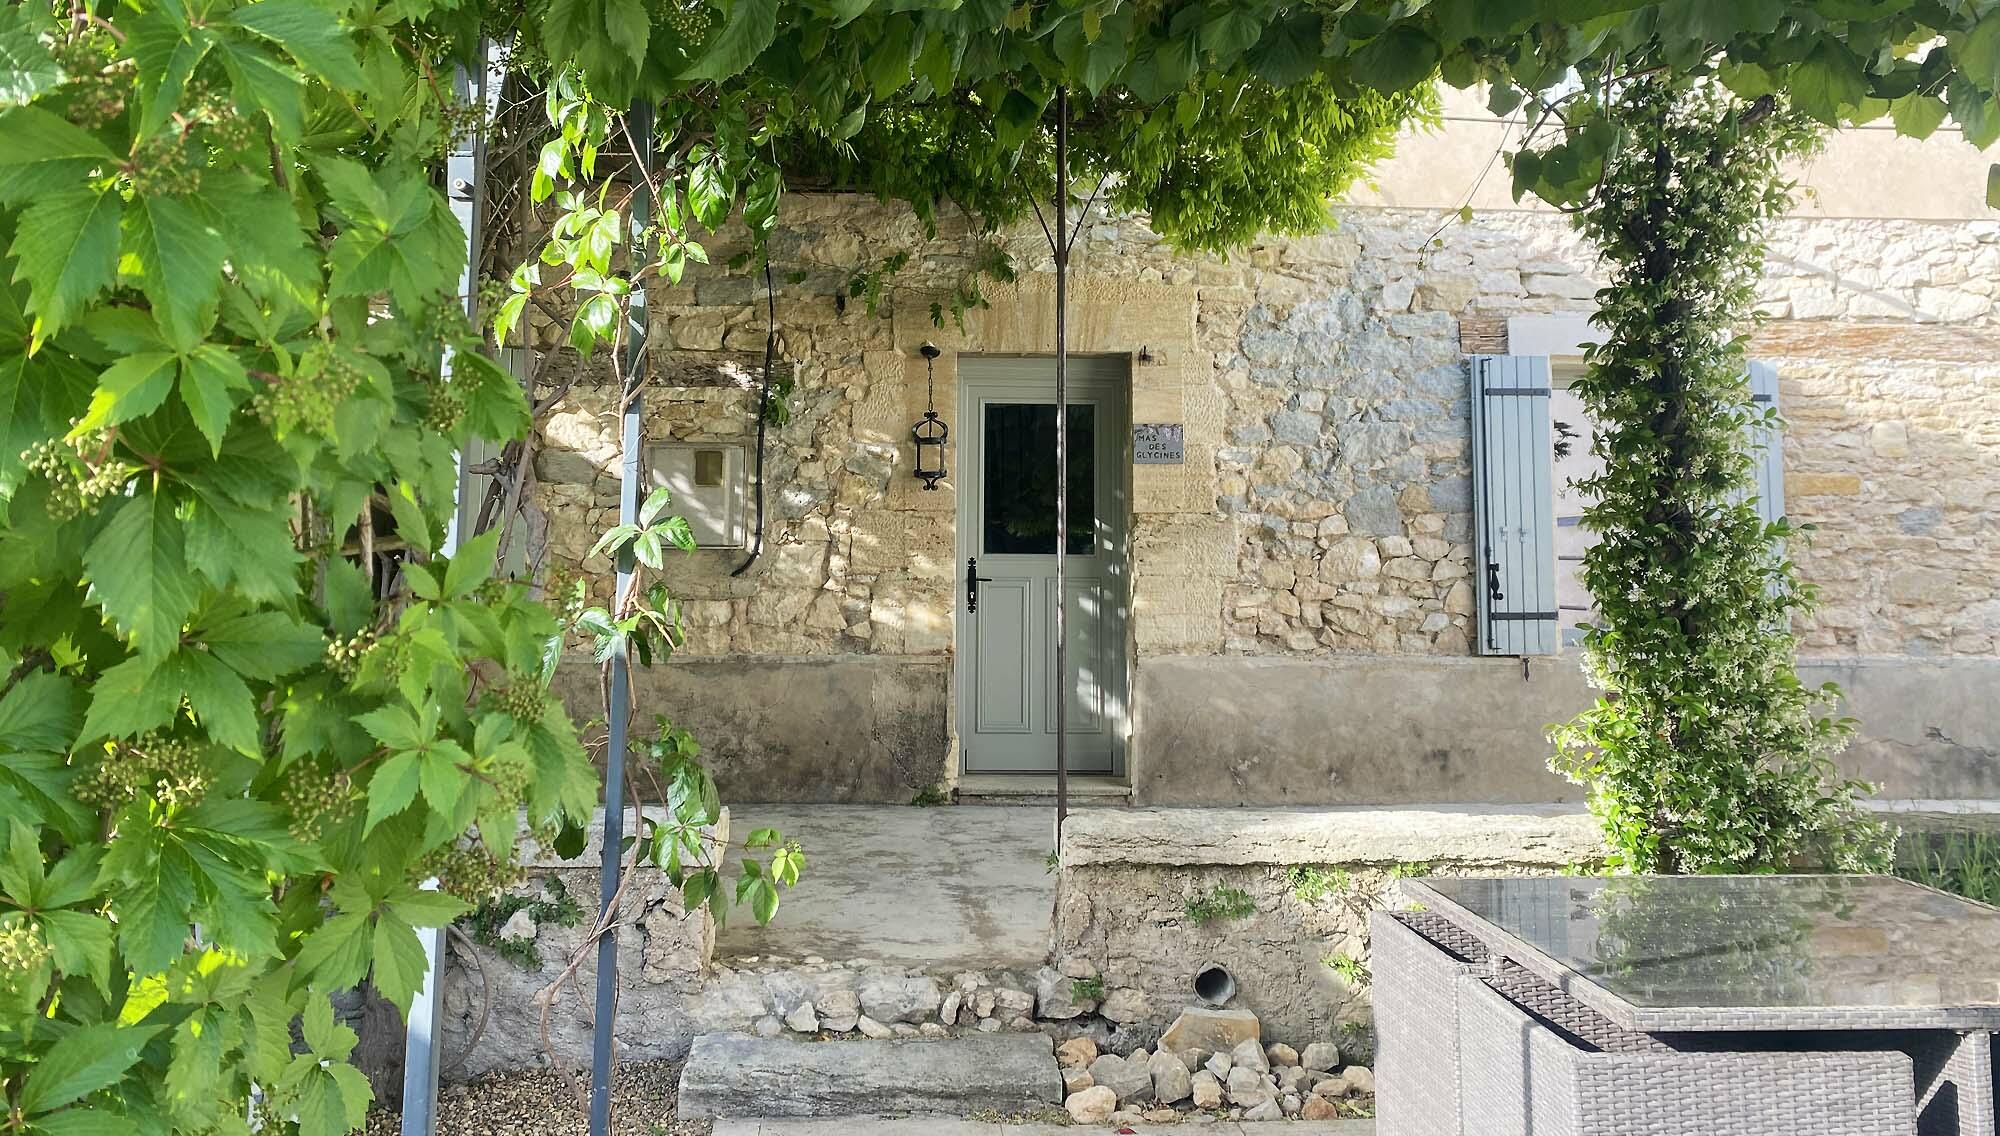 A charming authentic Provencal home